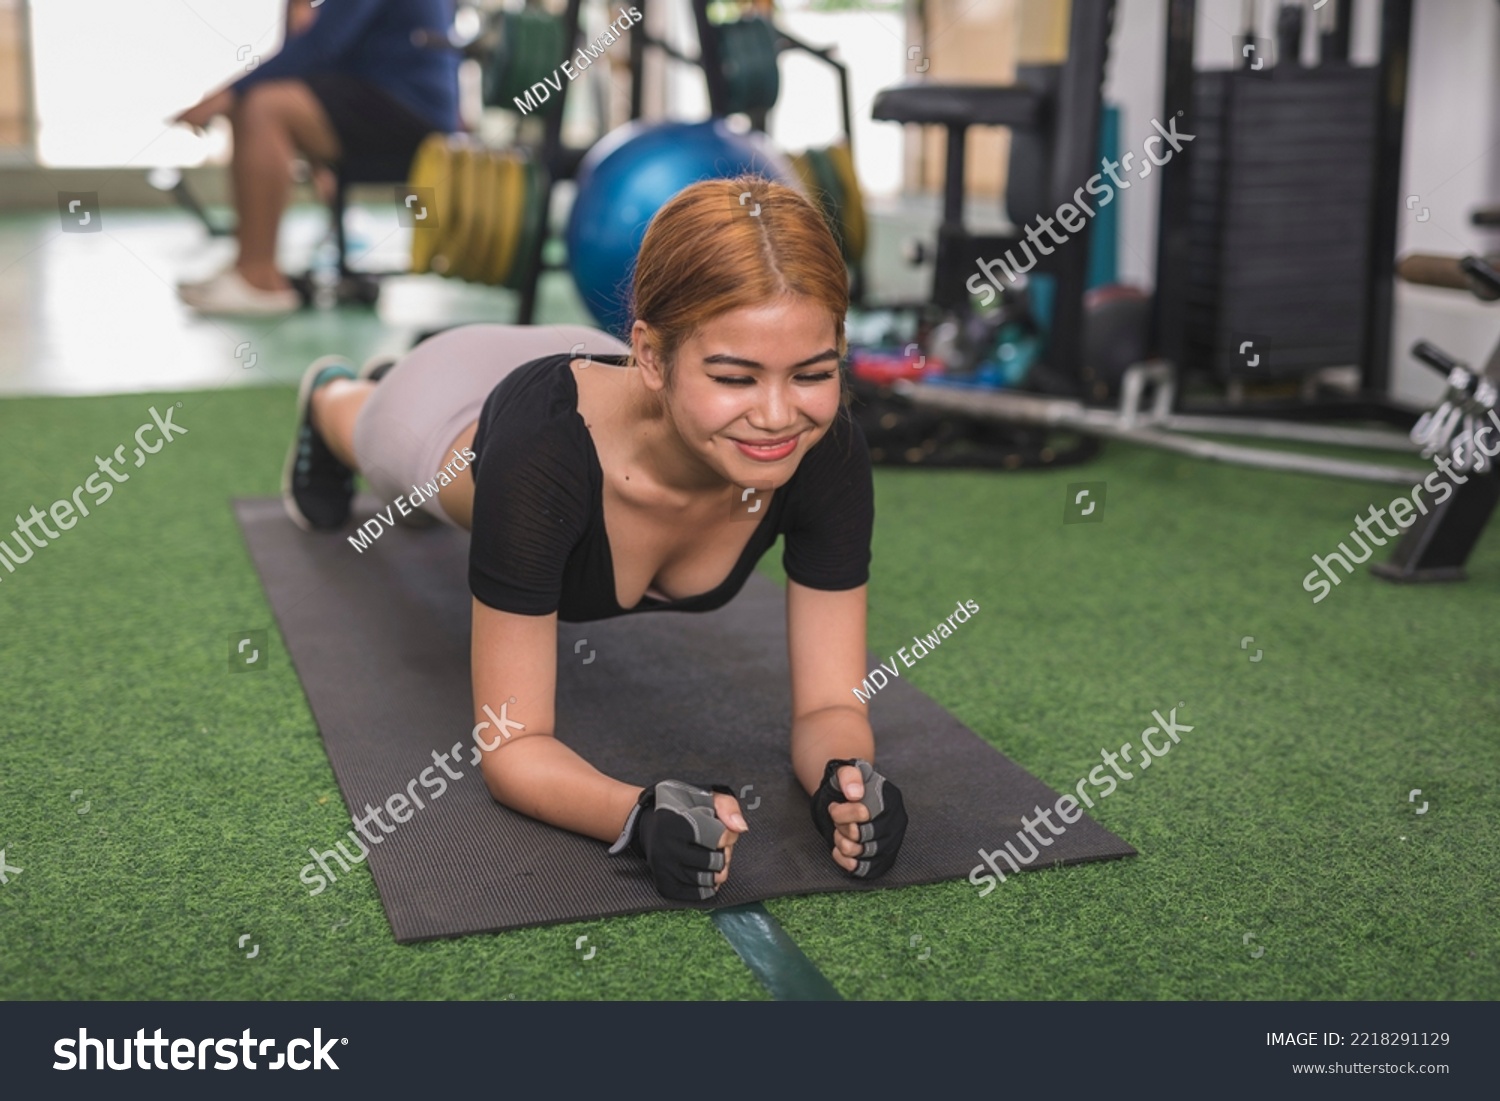 A charismatic woman smiles while doing planks on a black mat. Having fun and a lighthearted moment at the gym. #2218291129